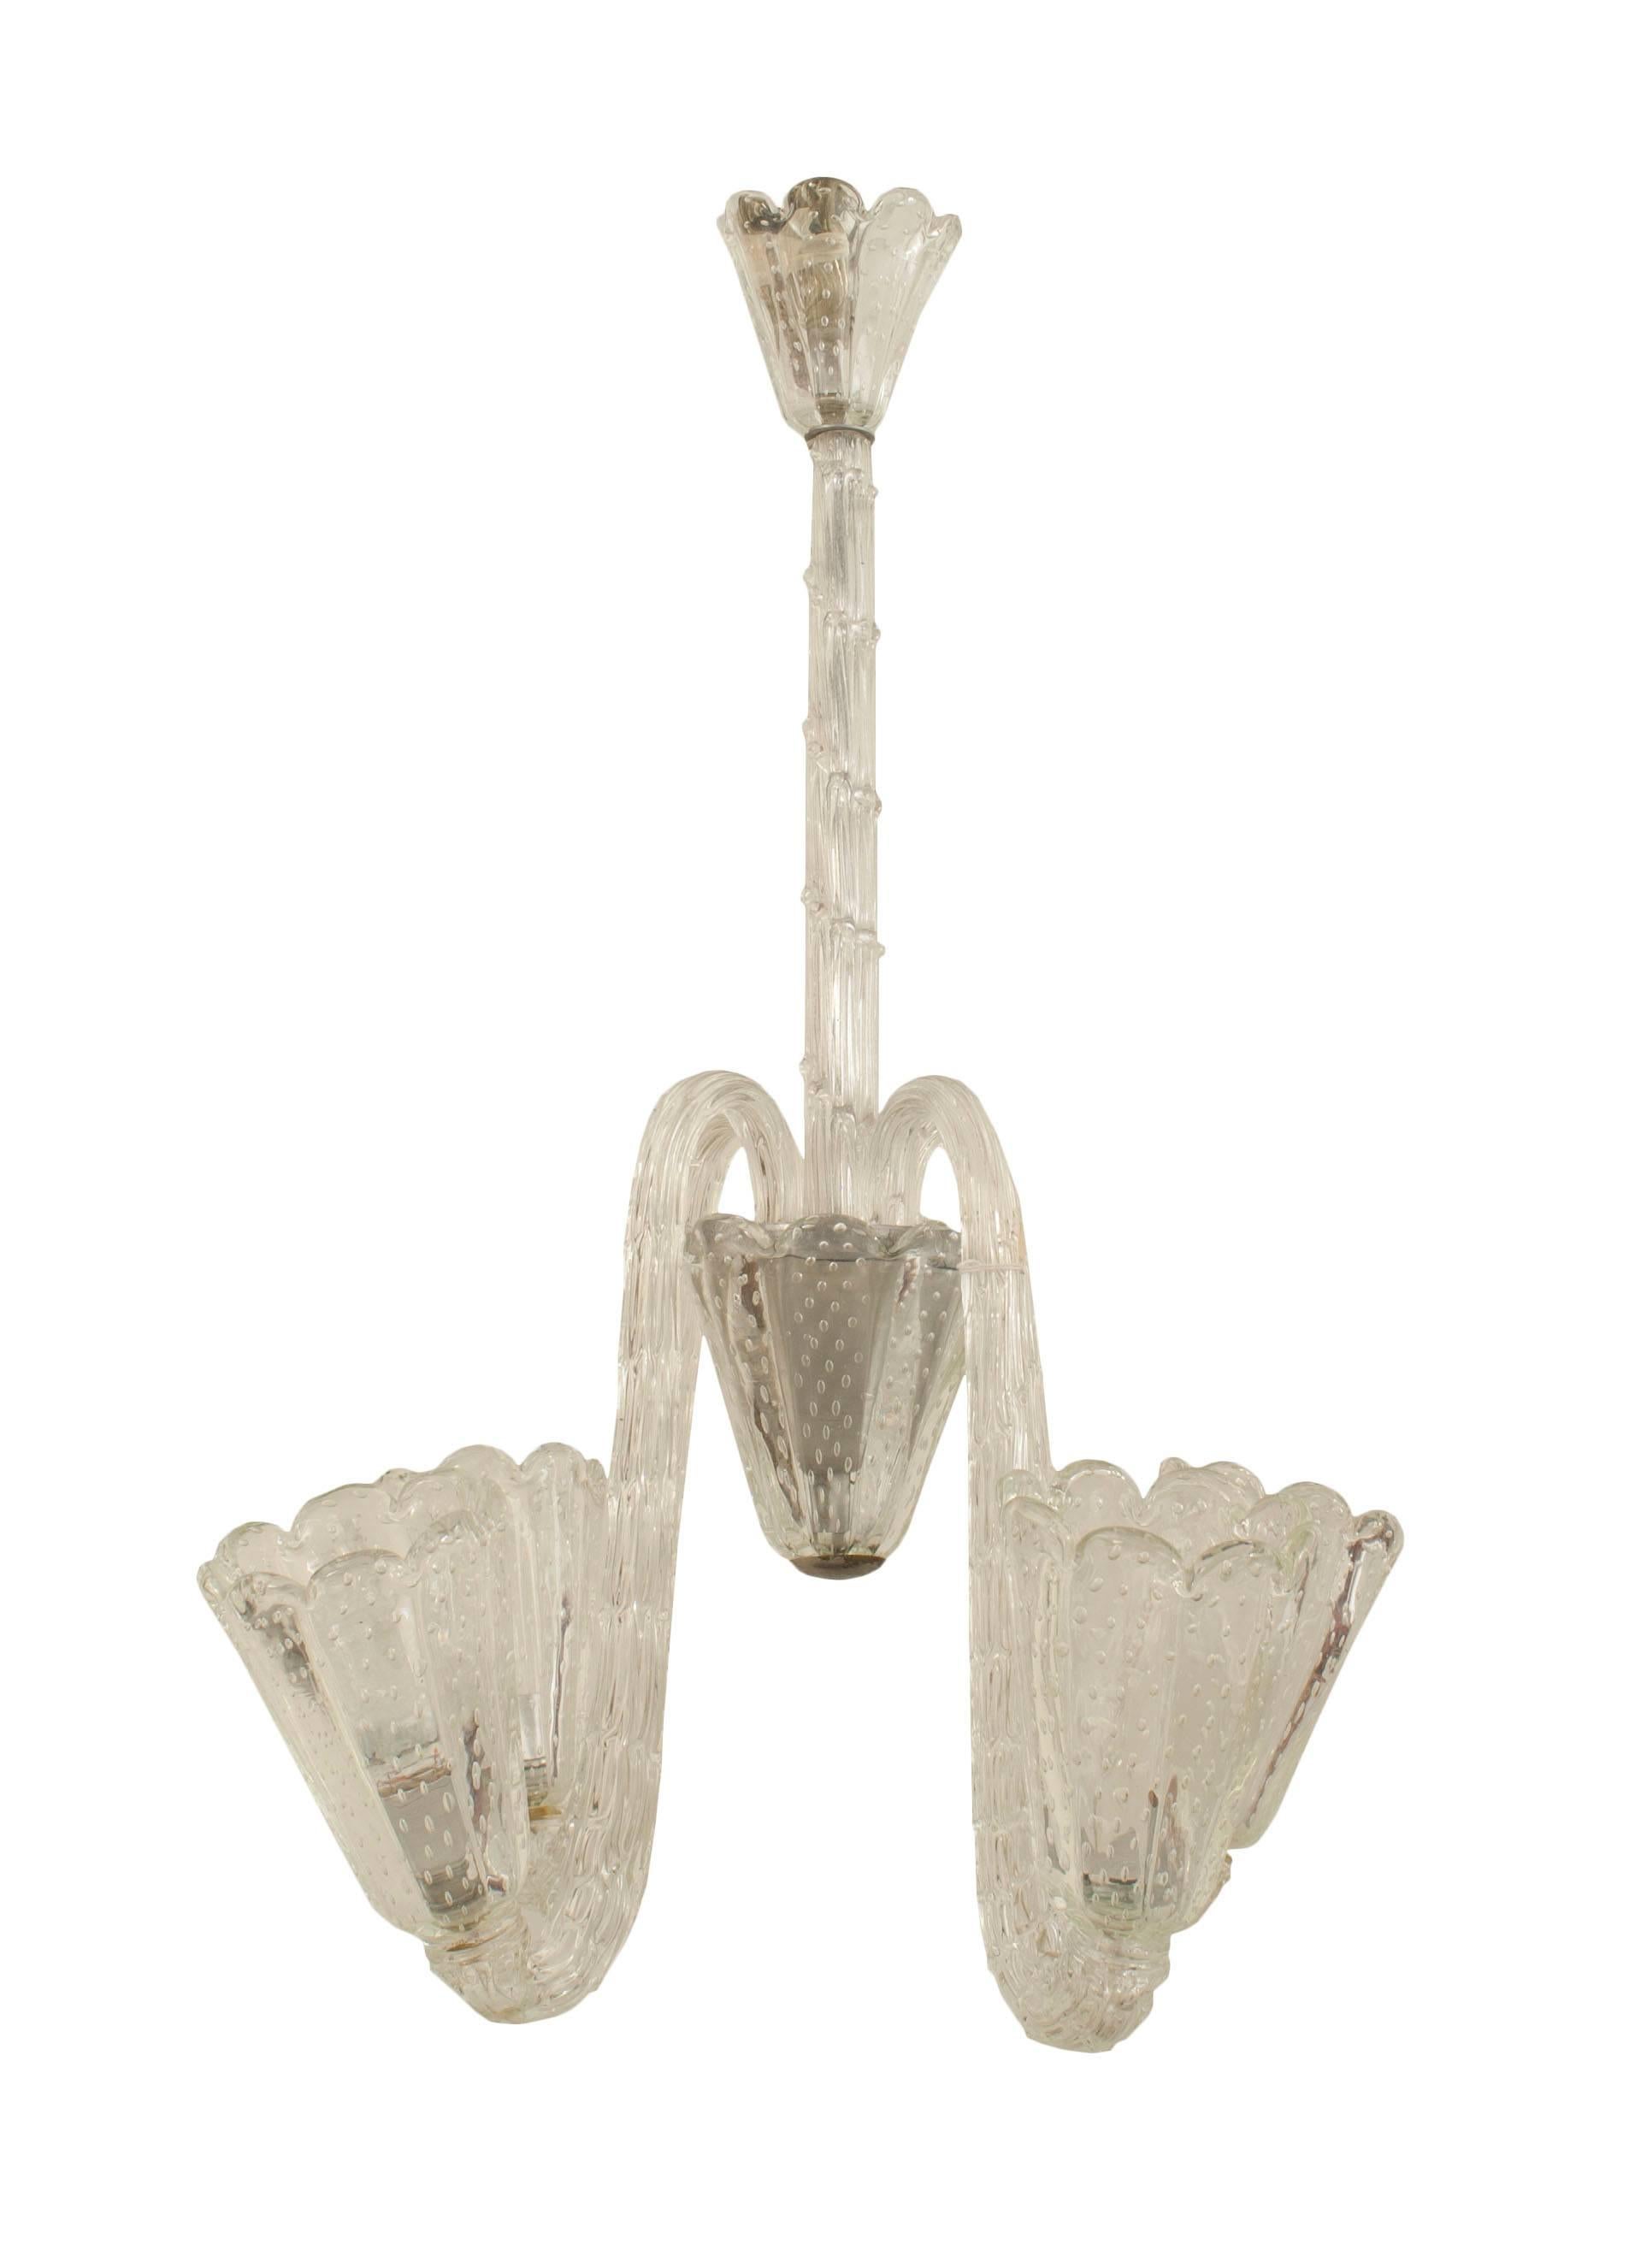 Italian 1940s chandelier with an opalescent glass swirl centerpost & scroll arms supporting internal bubble glass fluted & scalloped top shades (by BAROVIER ET TOSO)
